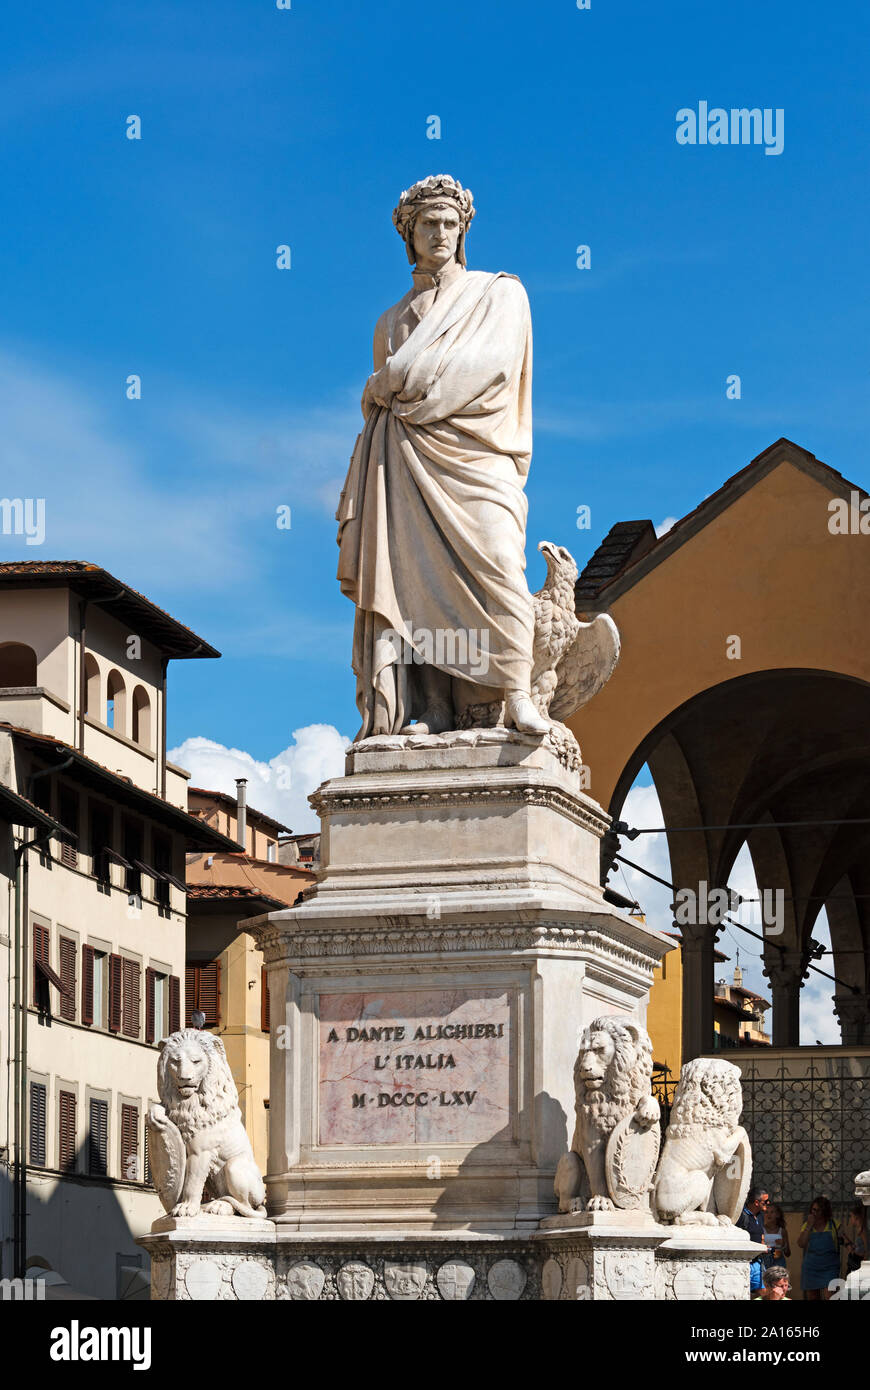 statue monument of Dante Alighieri on piazza santa croce, florence, tuscany, italy. Stock Photo